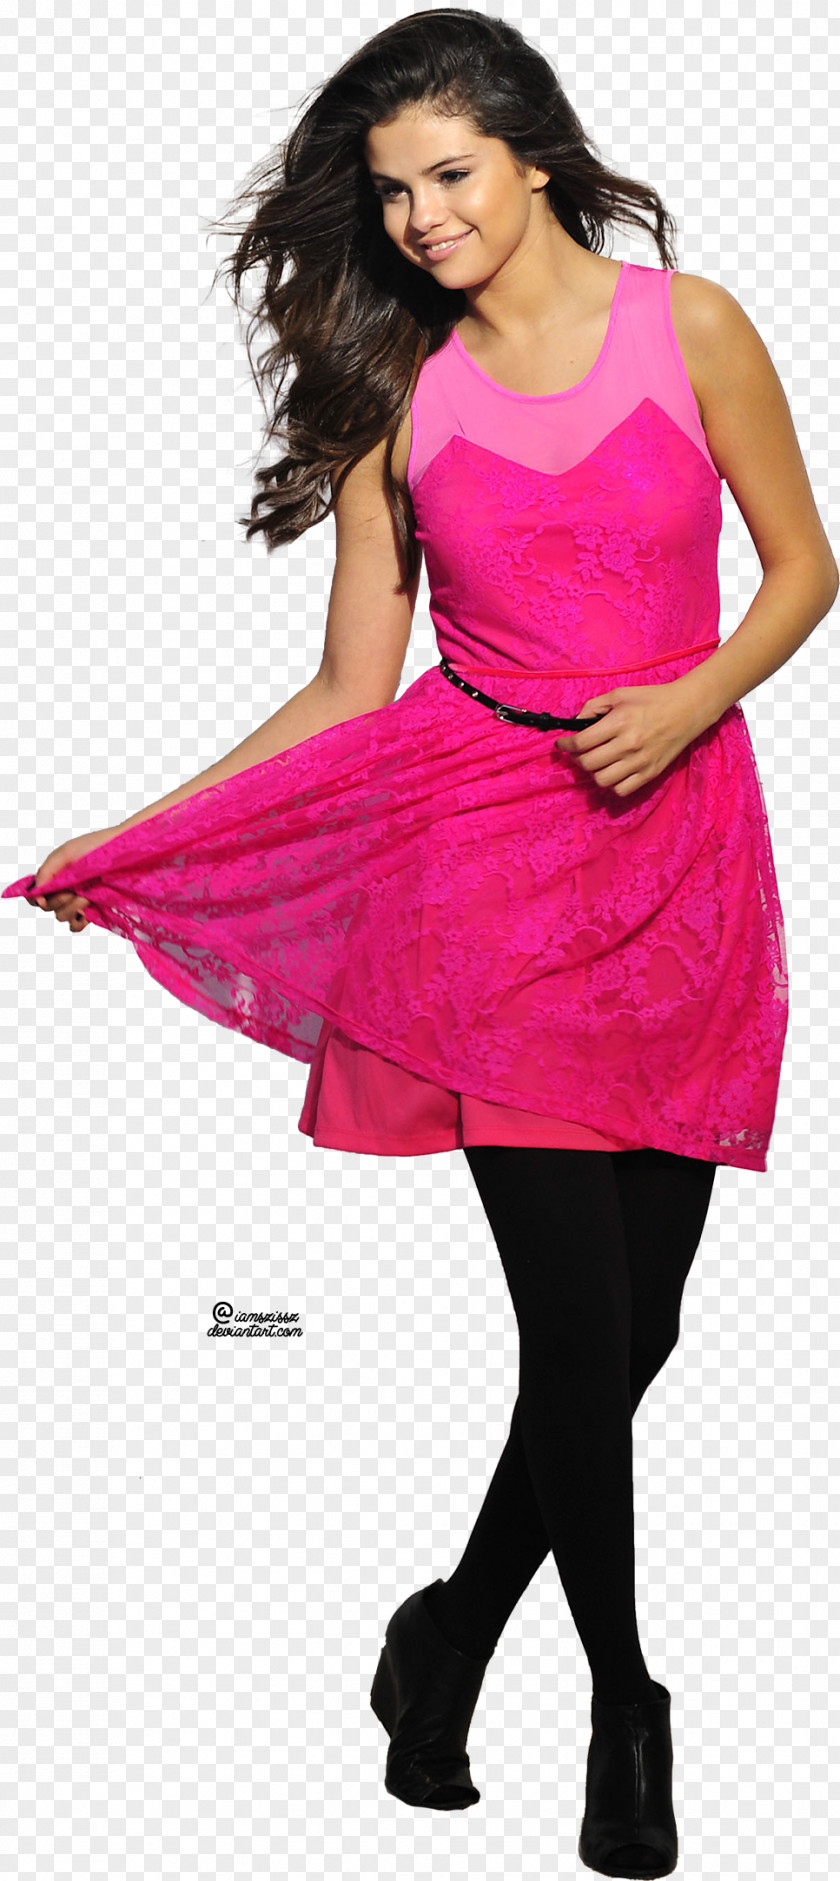 Selena Gomez Dream Out Loud By Photo Shoot Barney & Friends PNG